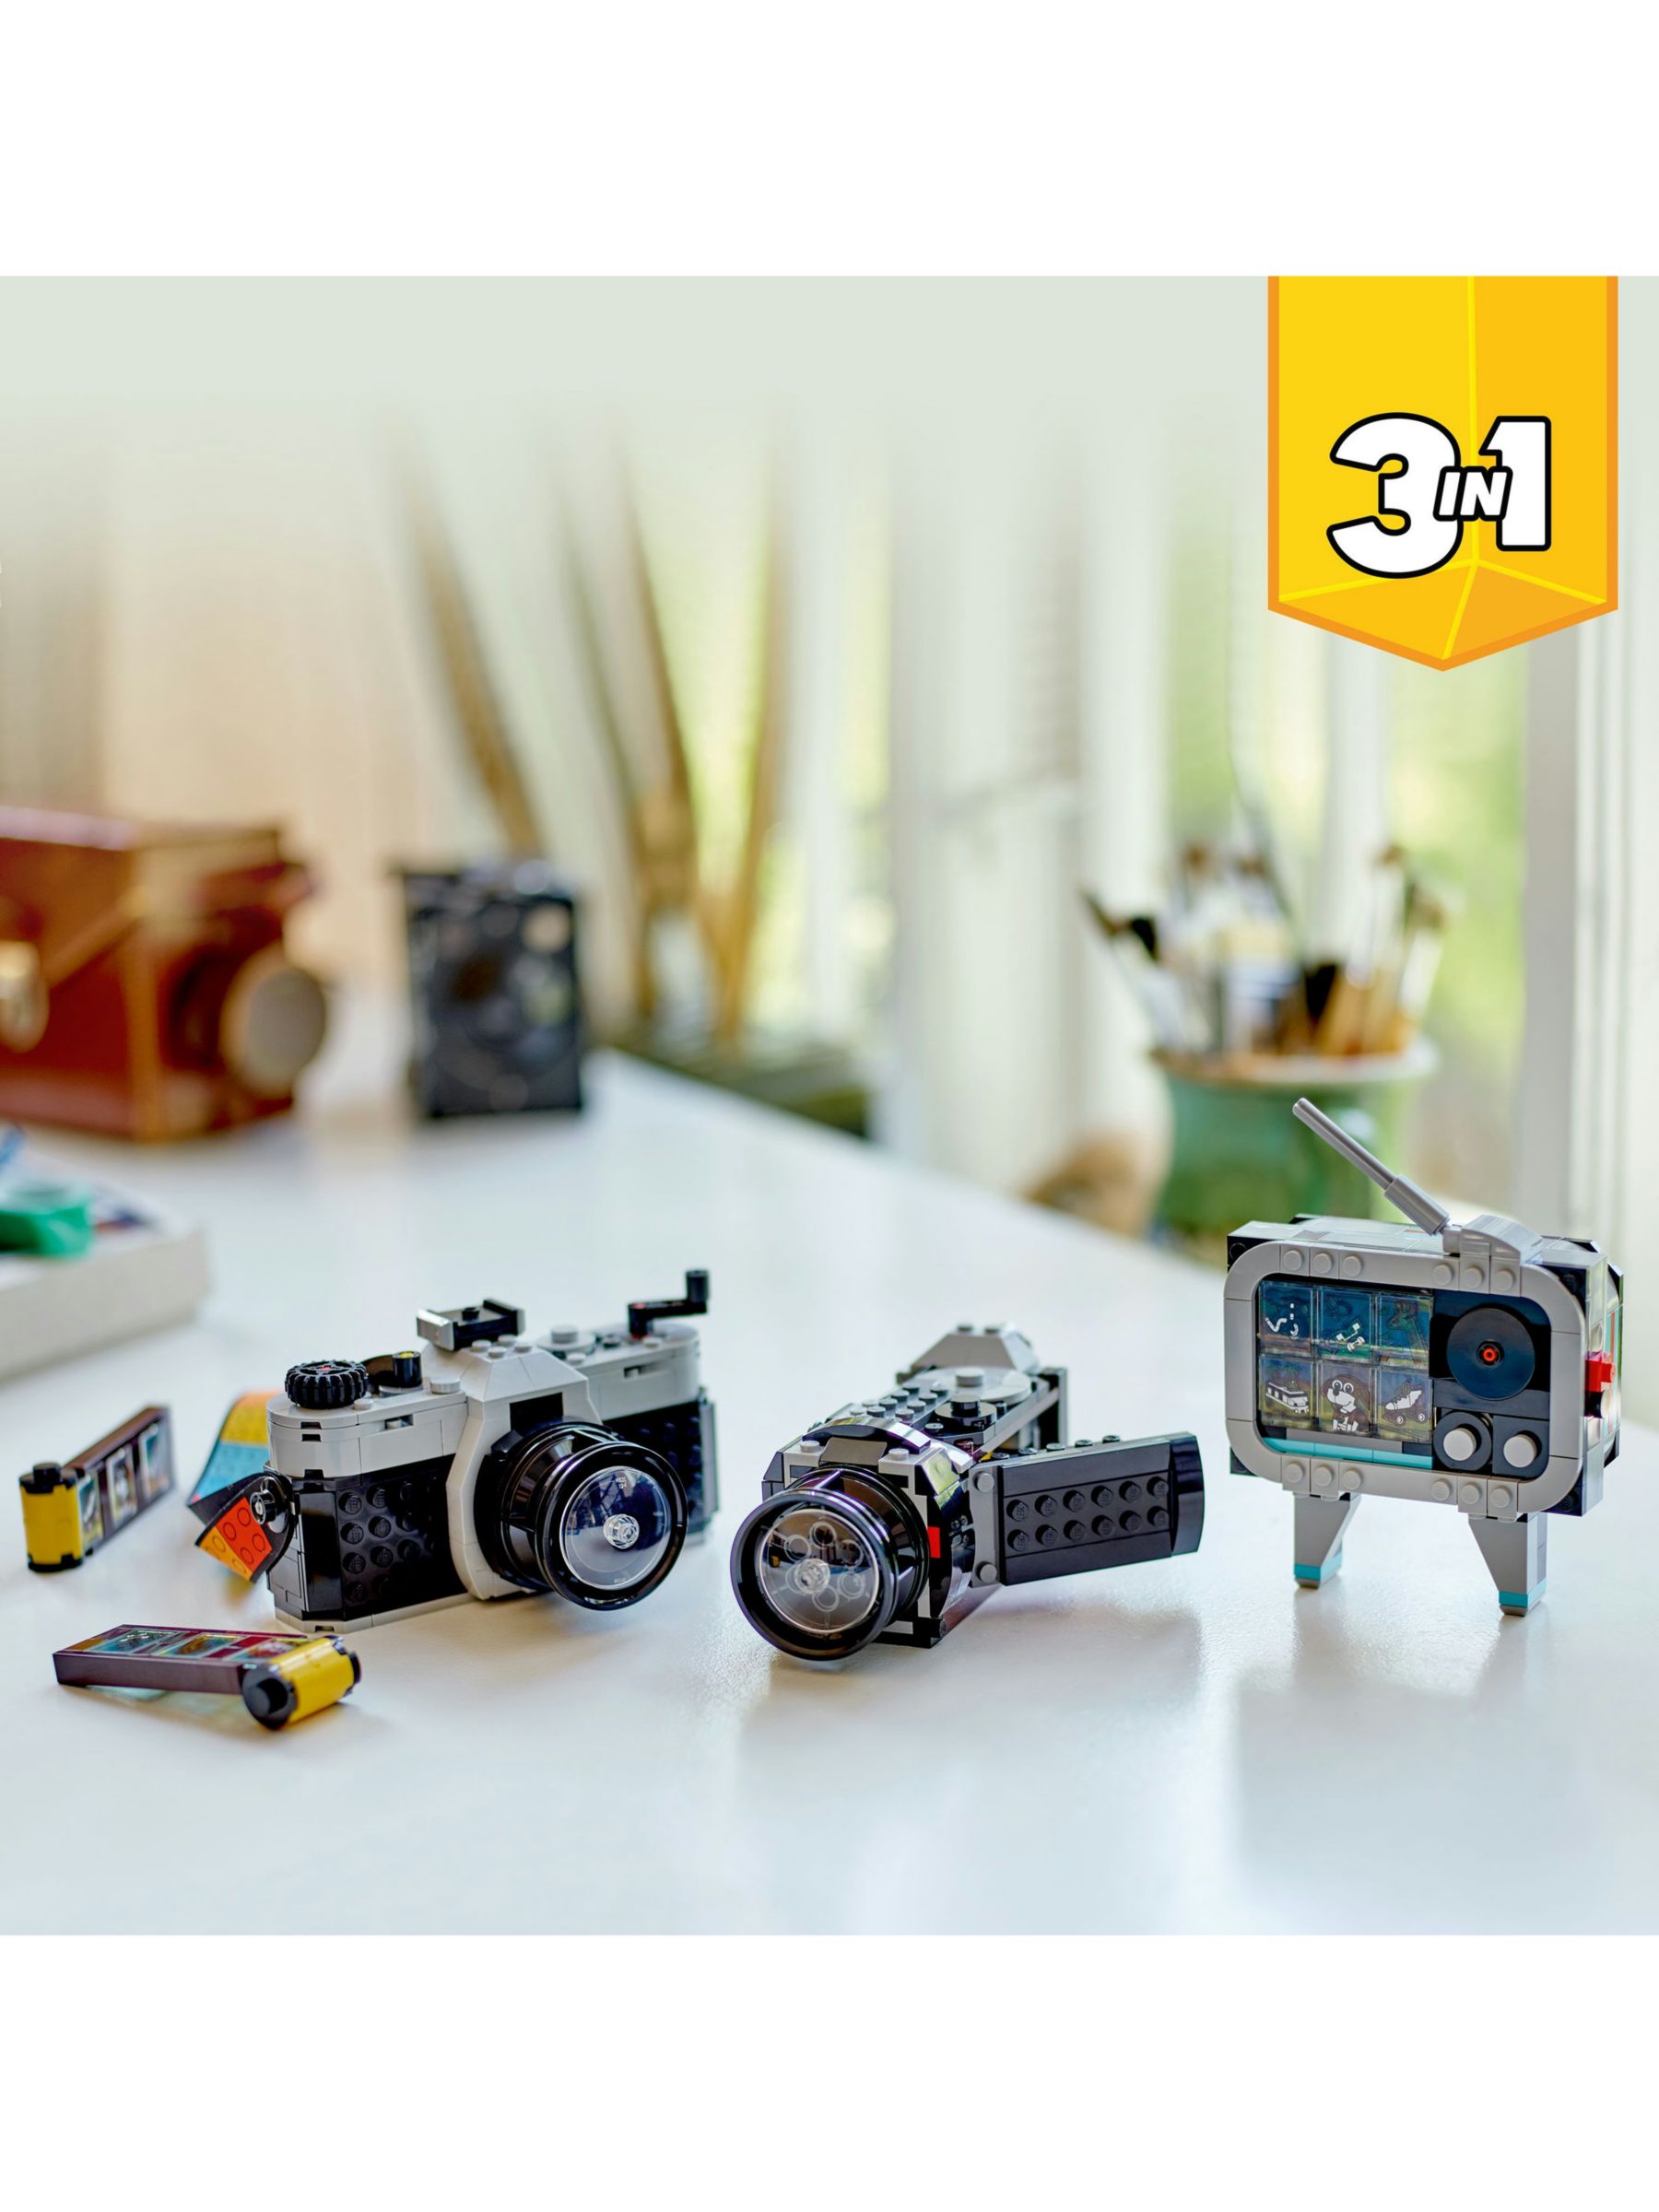 The Lego Retro Camera is a dream for old-school SLR fans